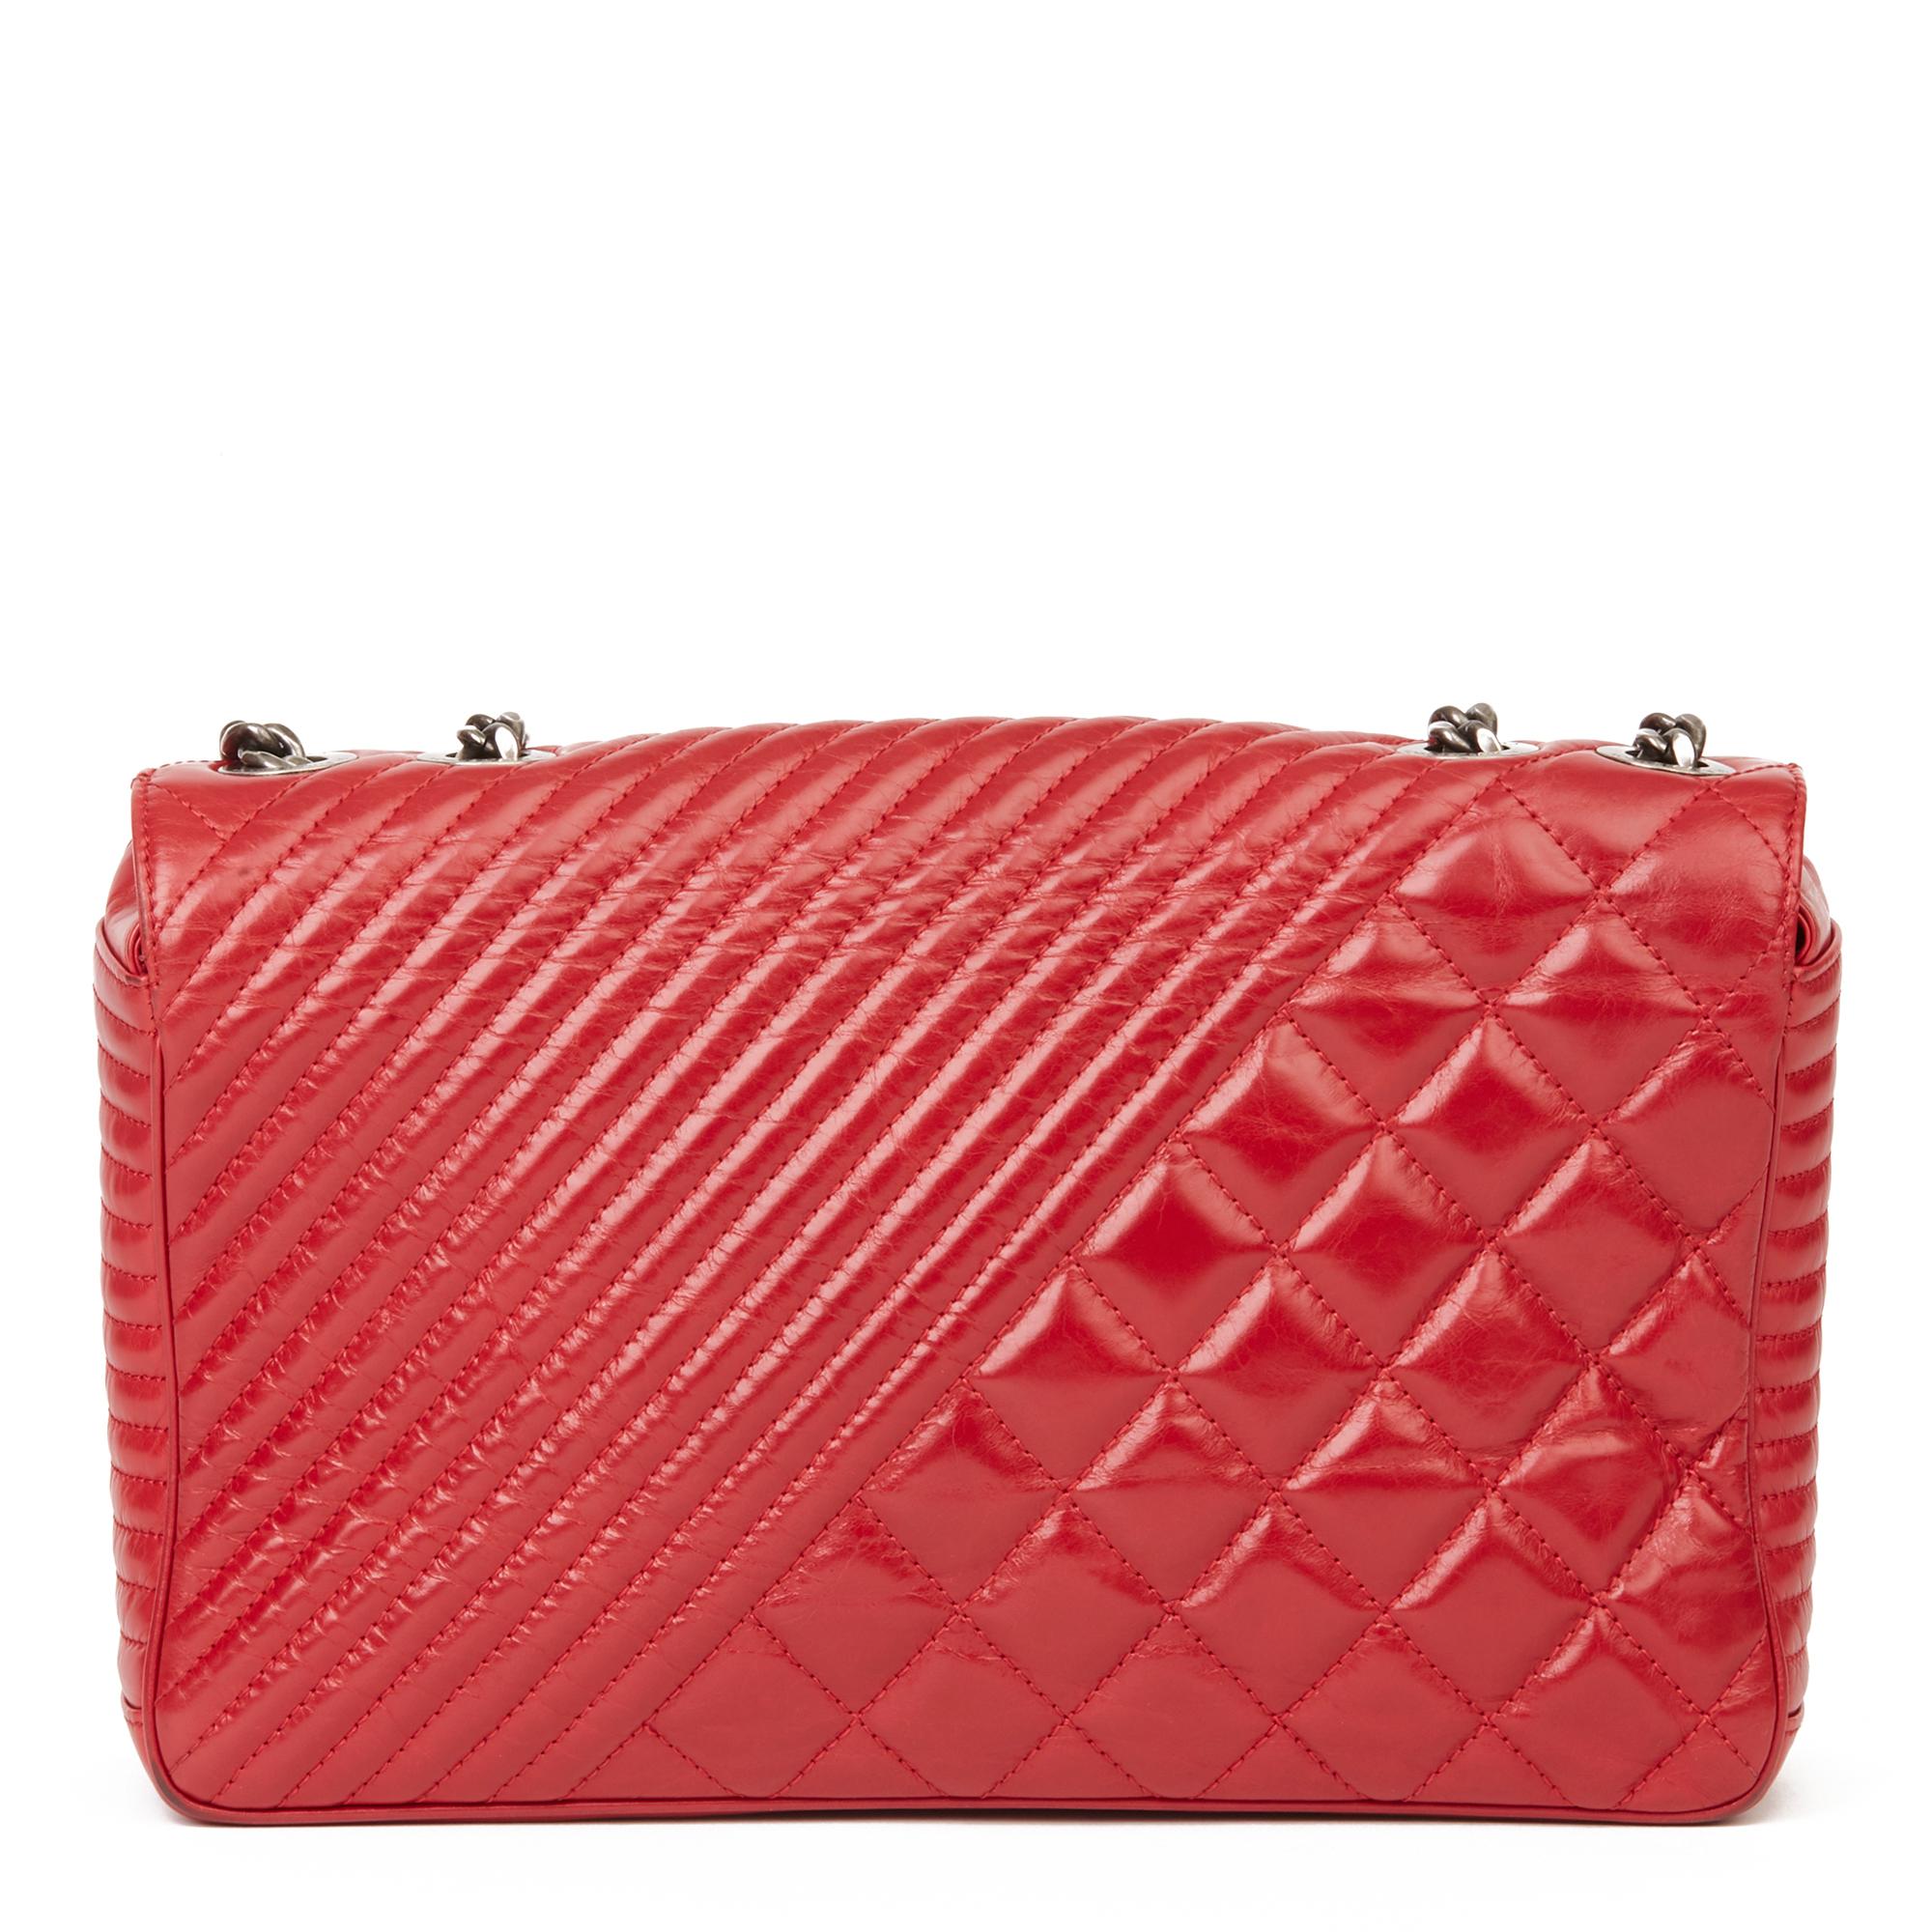 Women's 2014 Chanel Red Quilted Glazed Calfskin Leather Medium Coco Boy Flap Bag 